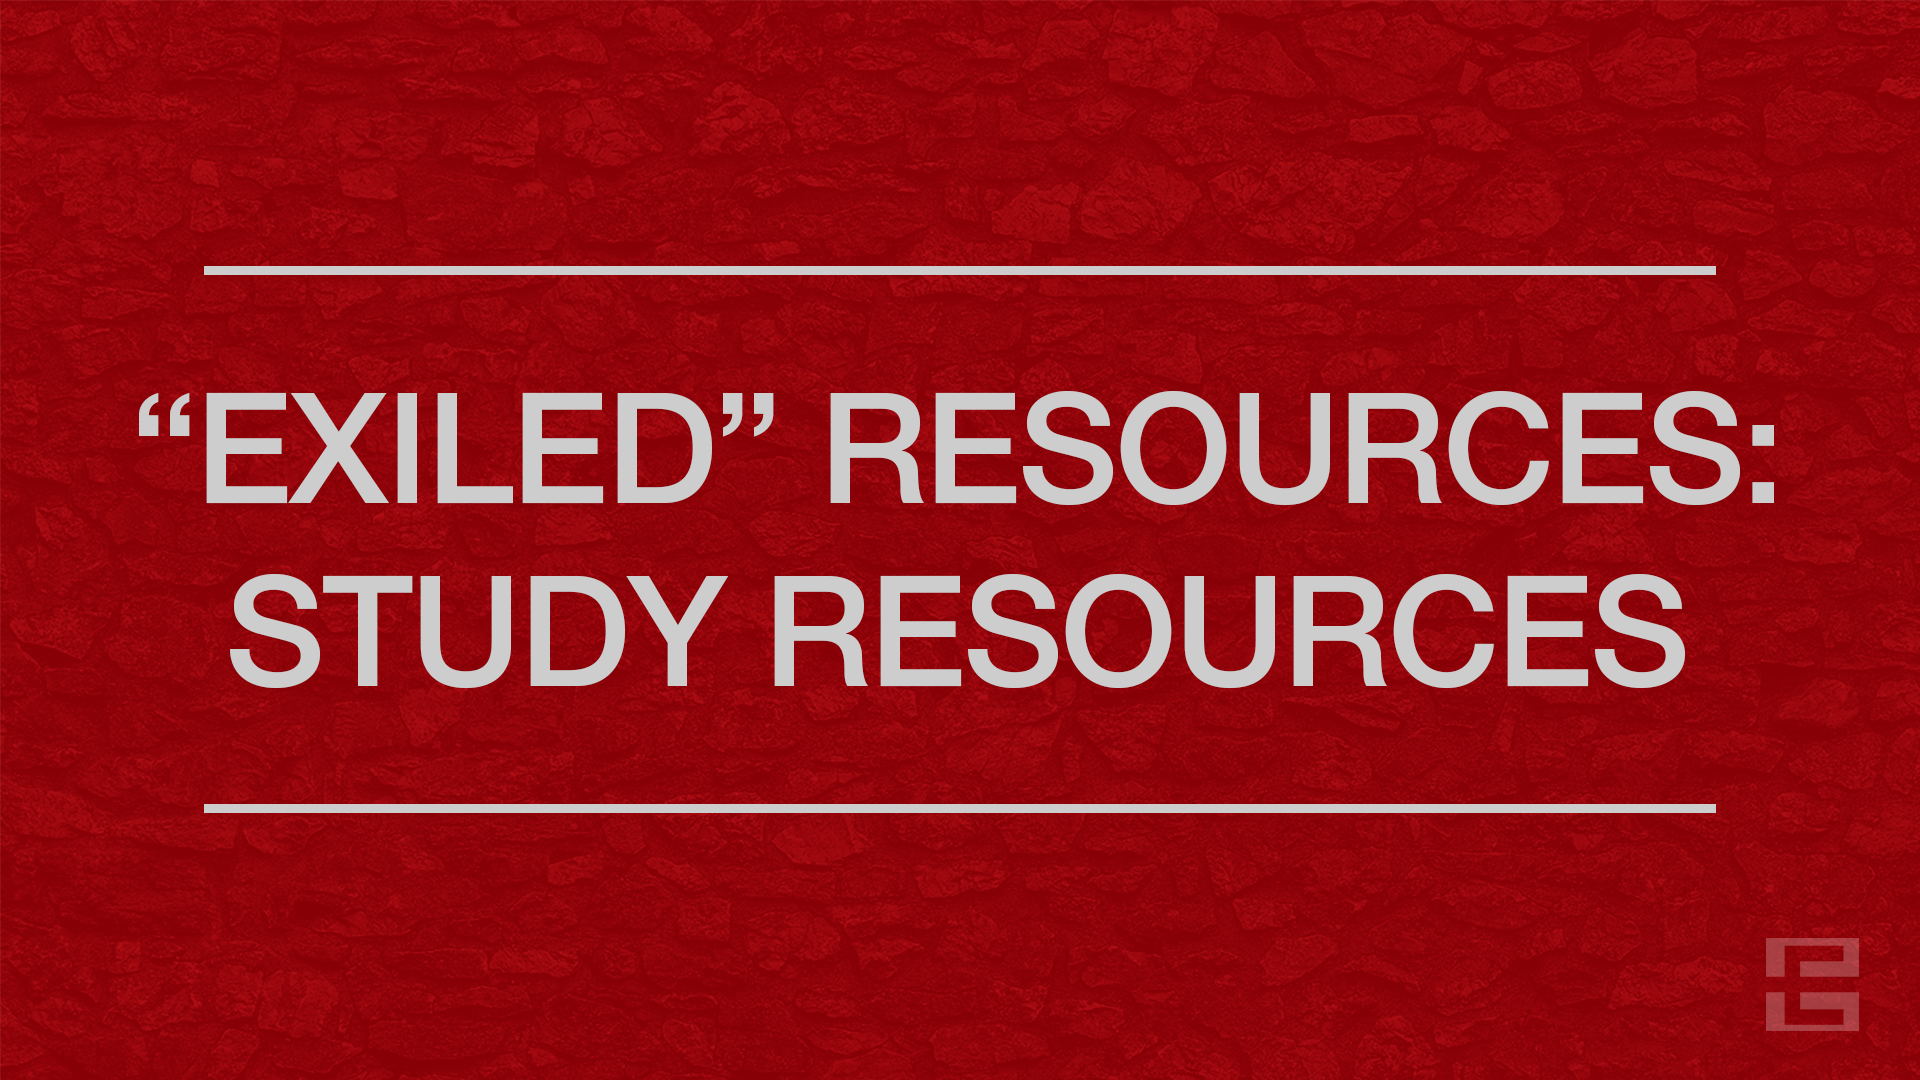 “Exiled” Resources: Study Resources